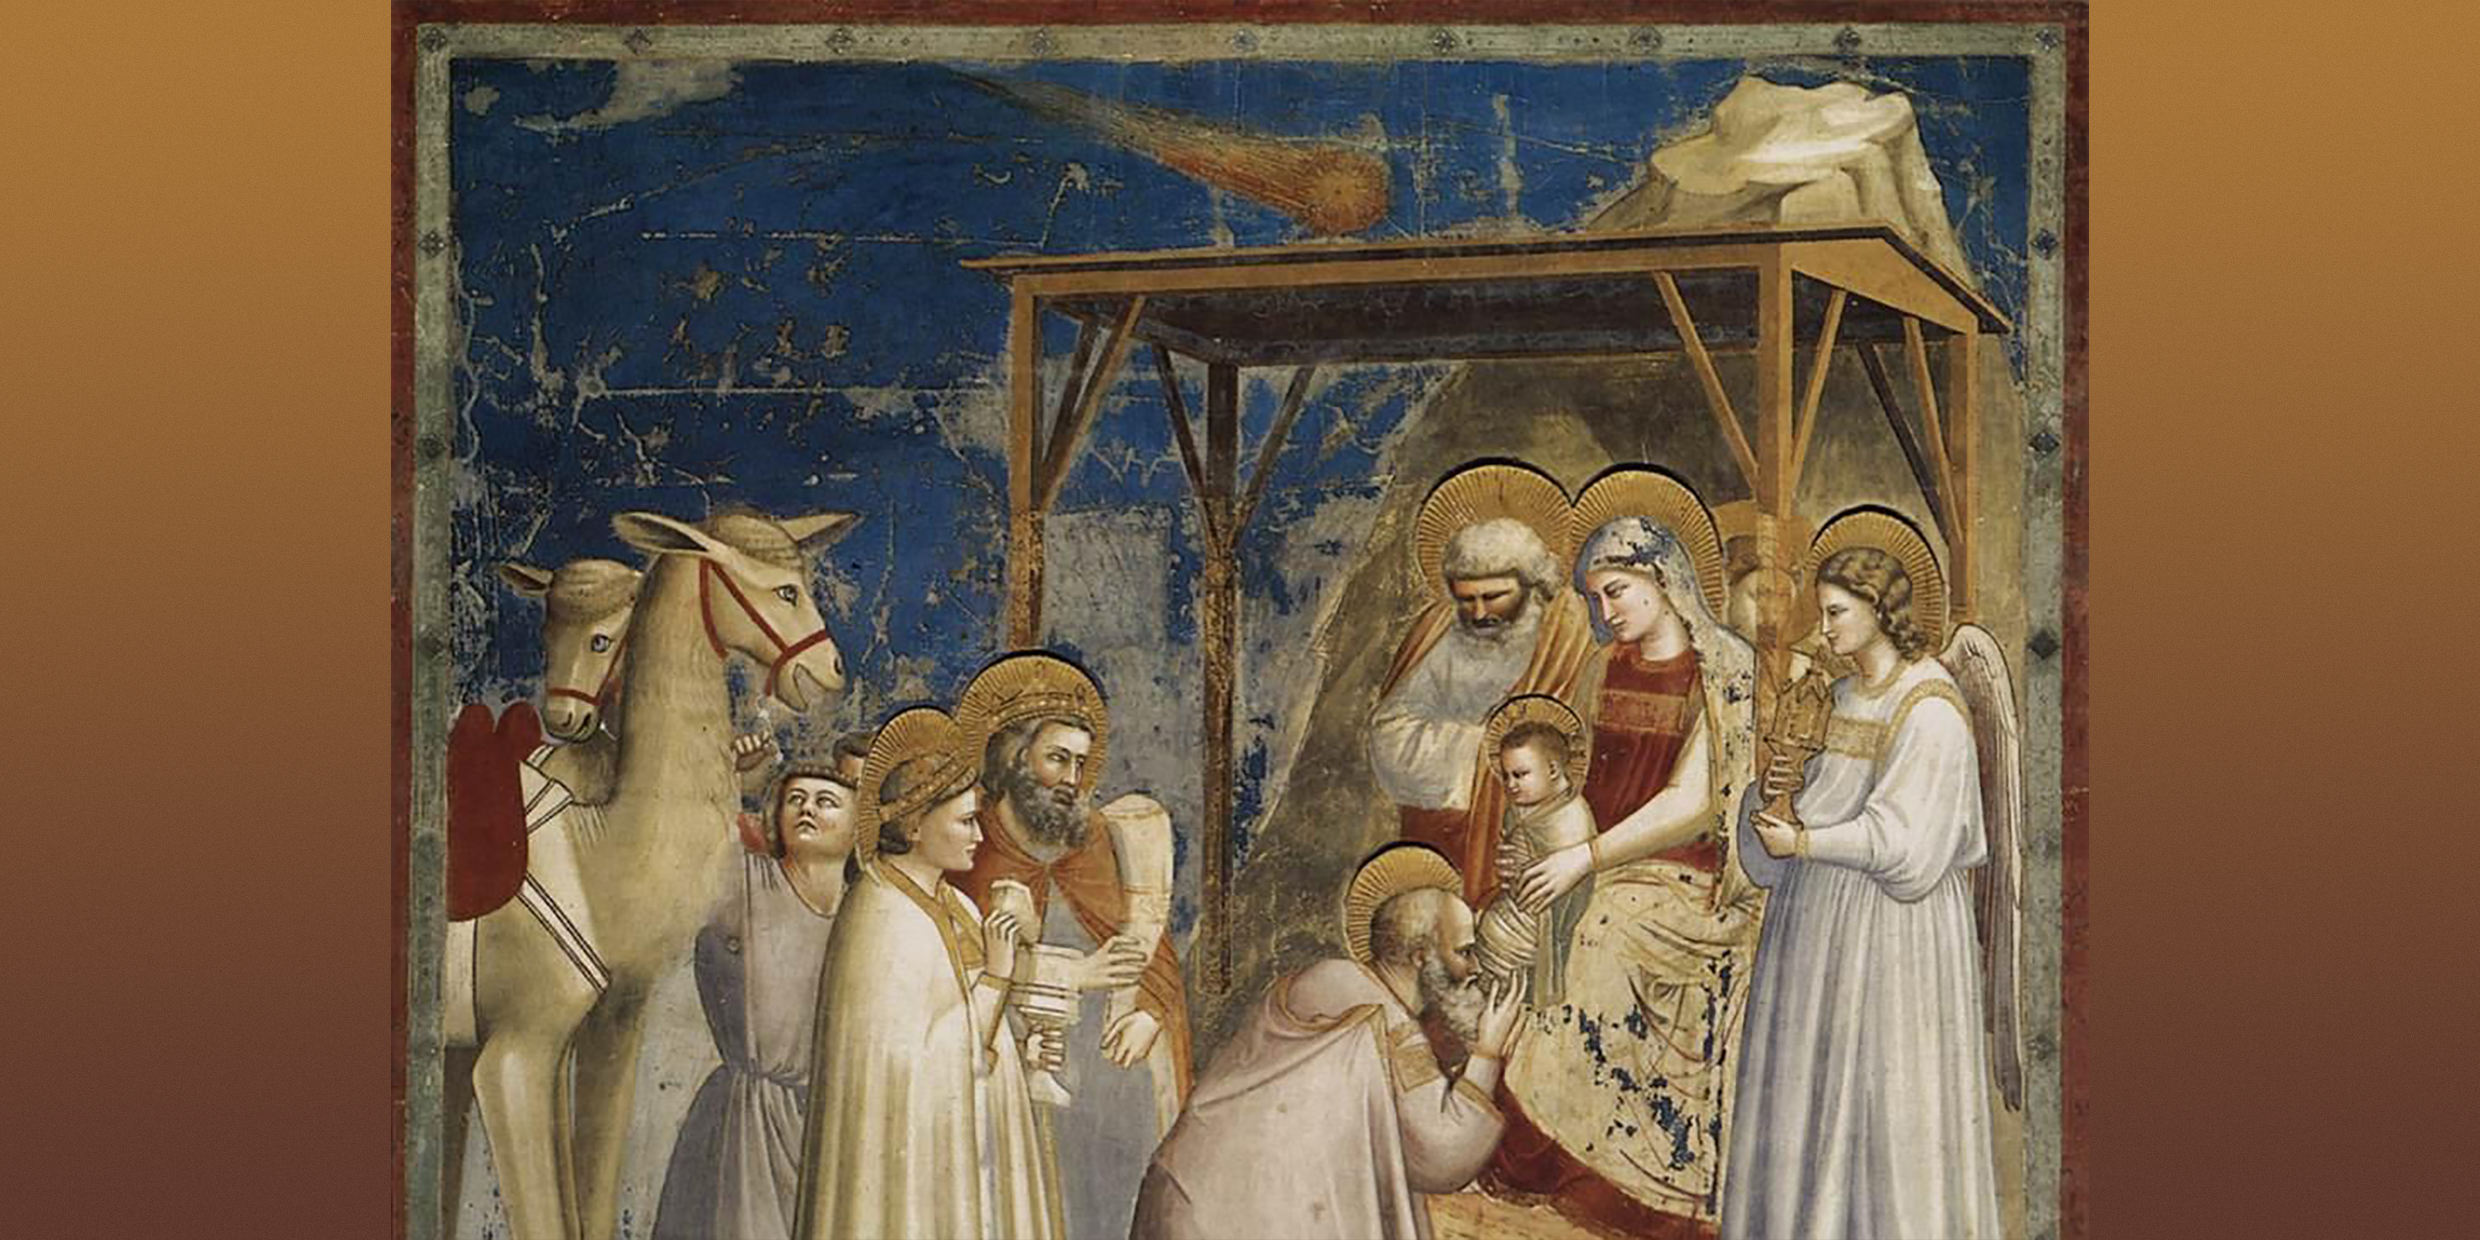 Image of Giotto's Adoration of the Magi